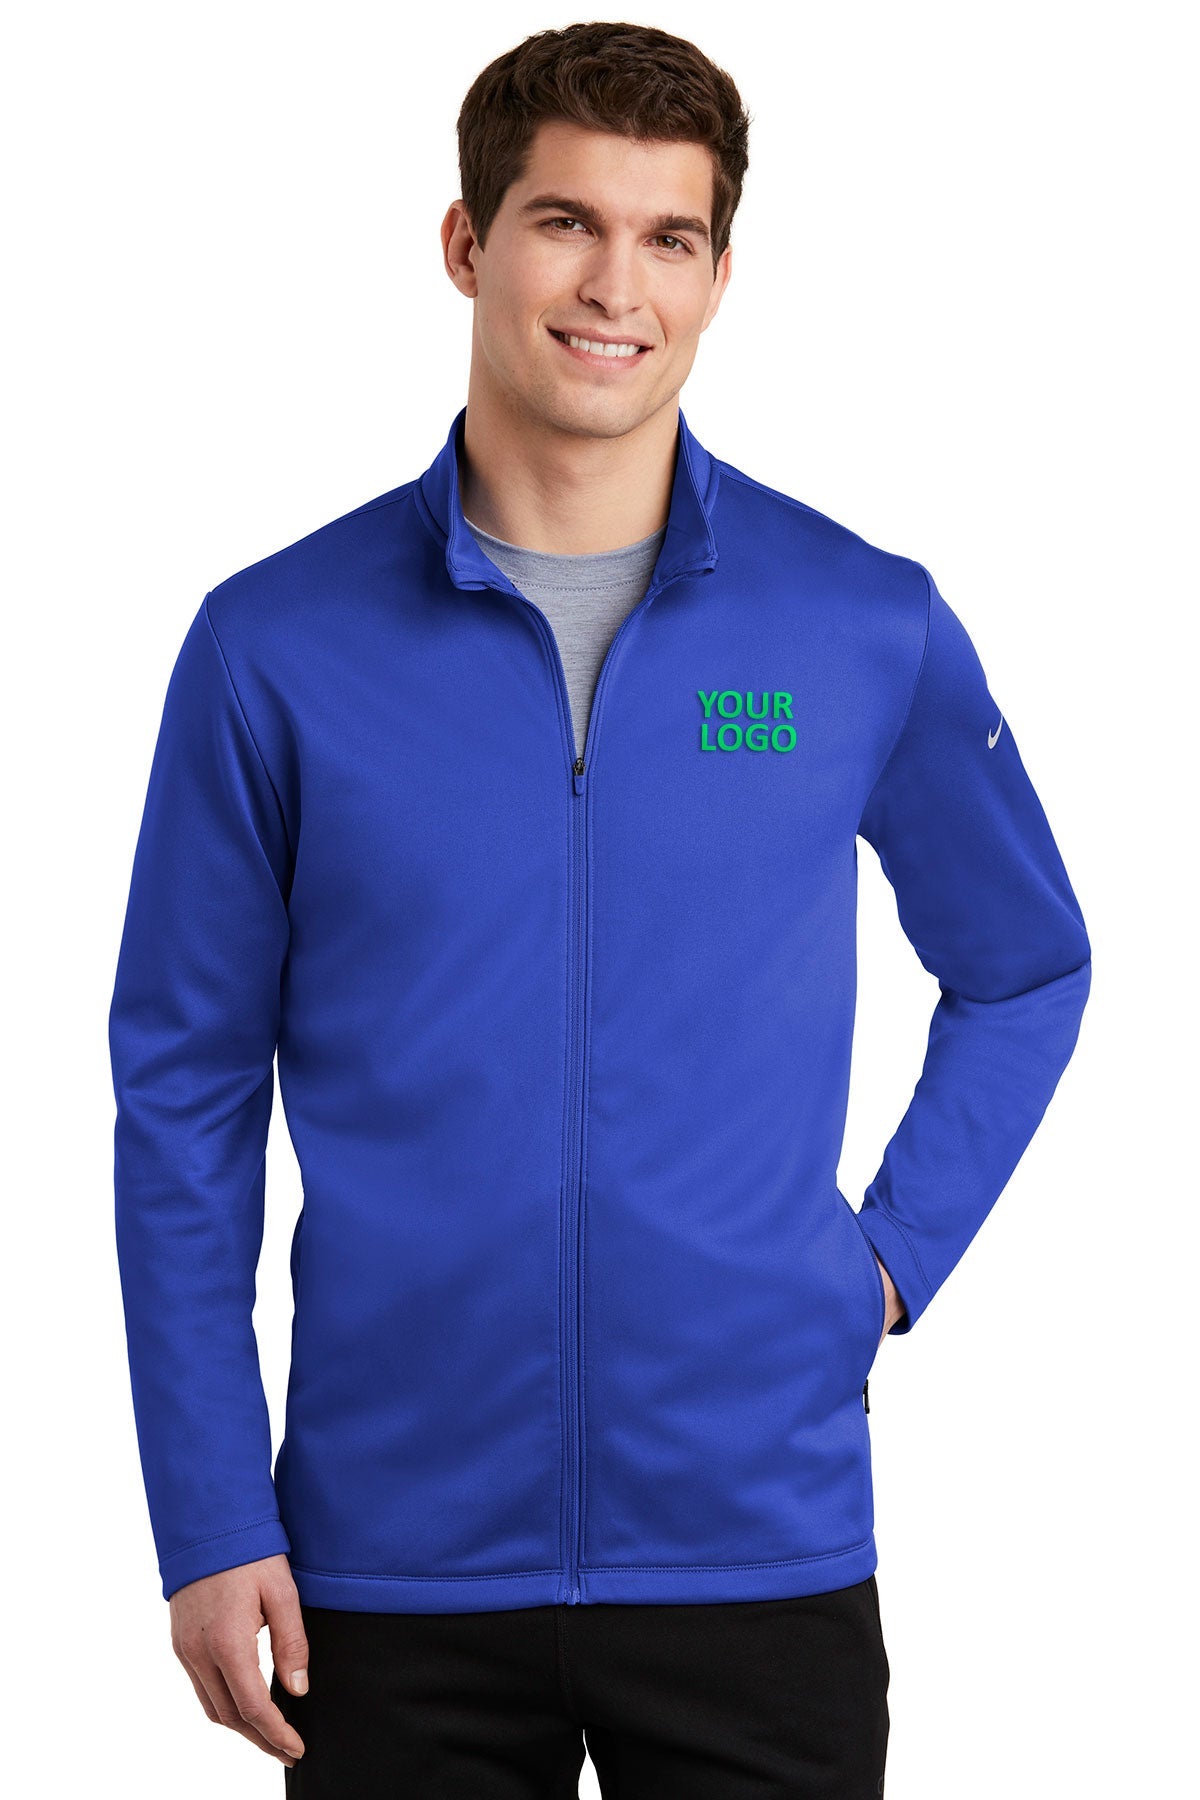 Nike Game Royal NKAH6418 embroidered jackets for business